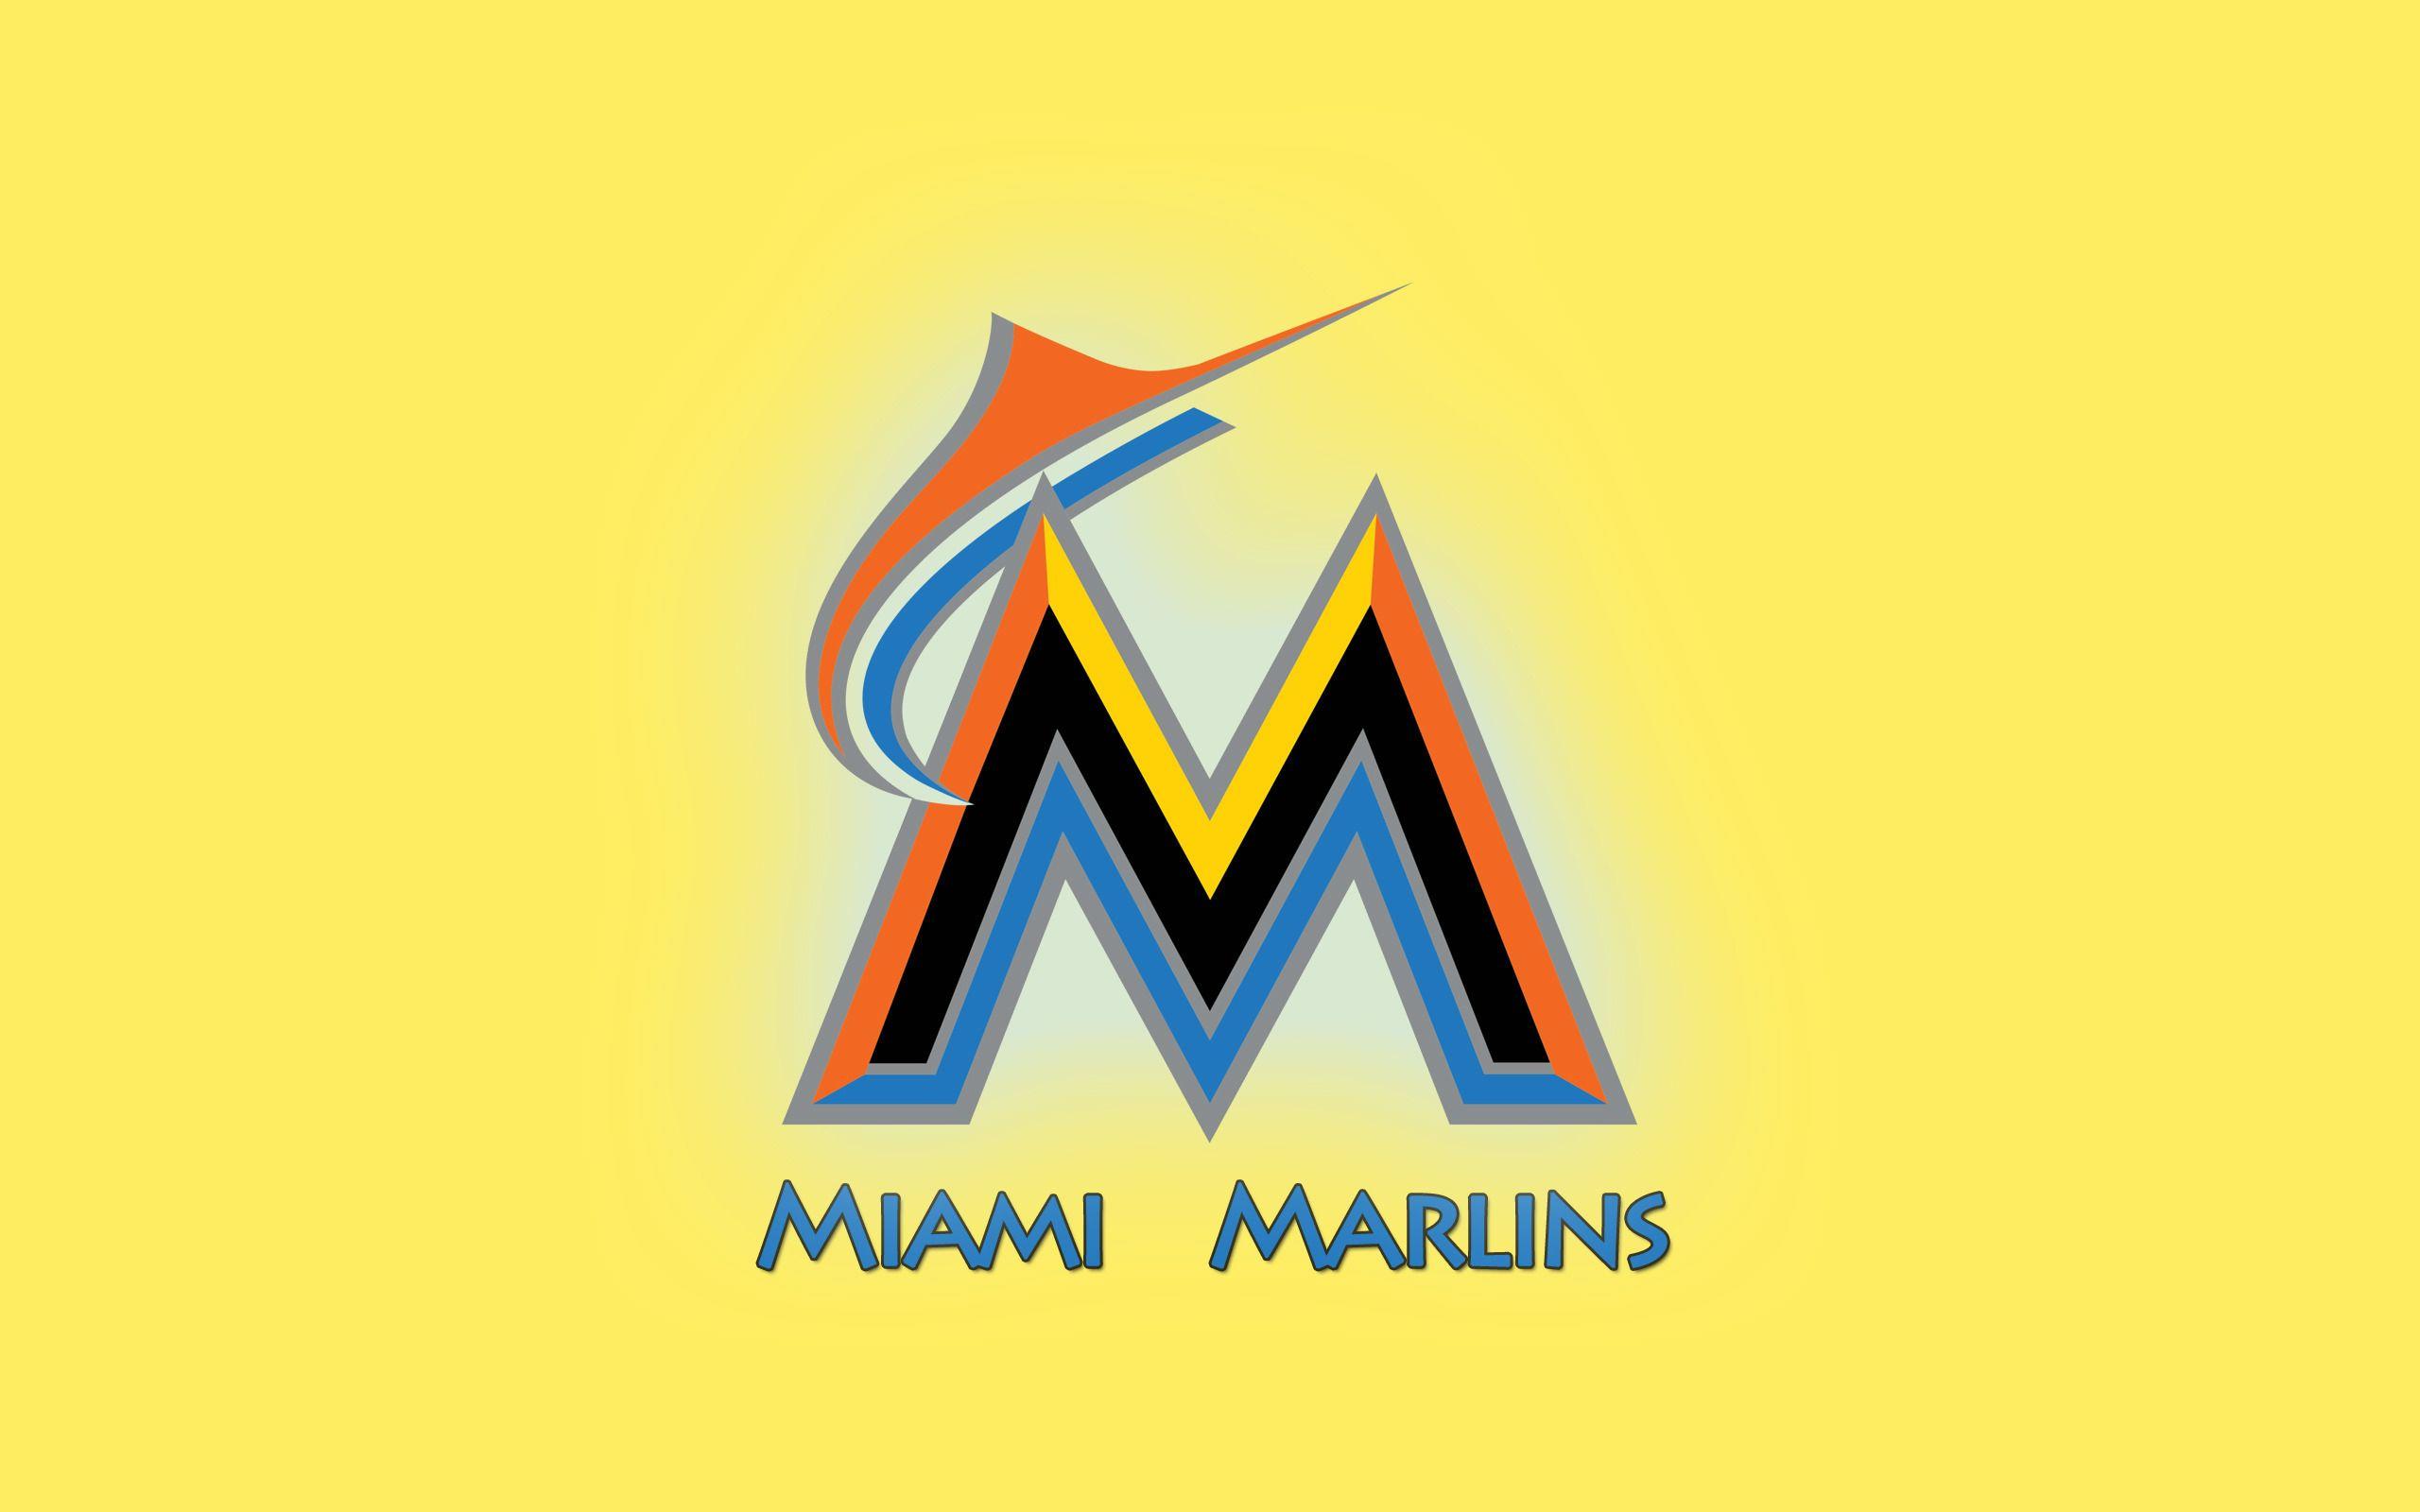 100+] Miami Marlins Backgrounds